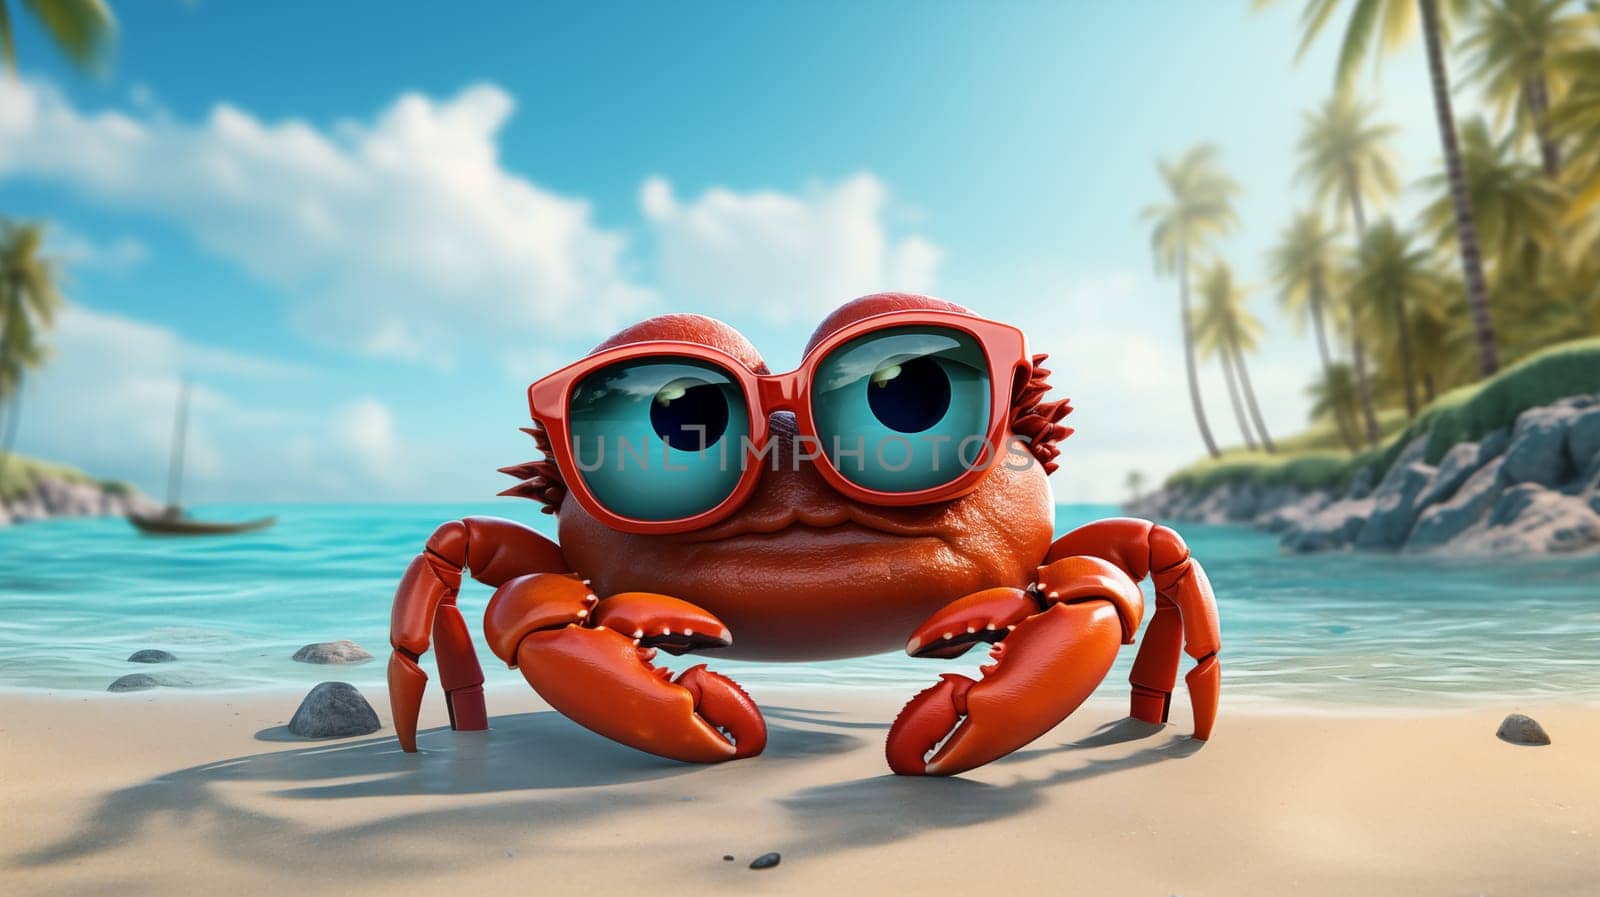 charming red cartoon crab with big expressive eyes donning oversized glasses on a sandy beach by Zakharova